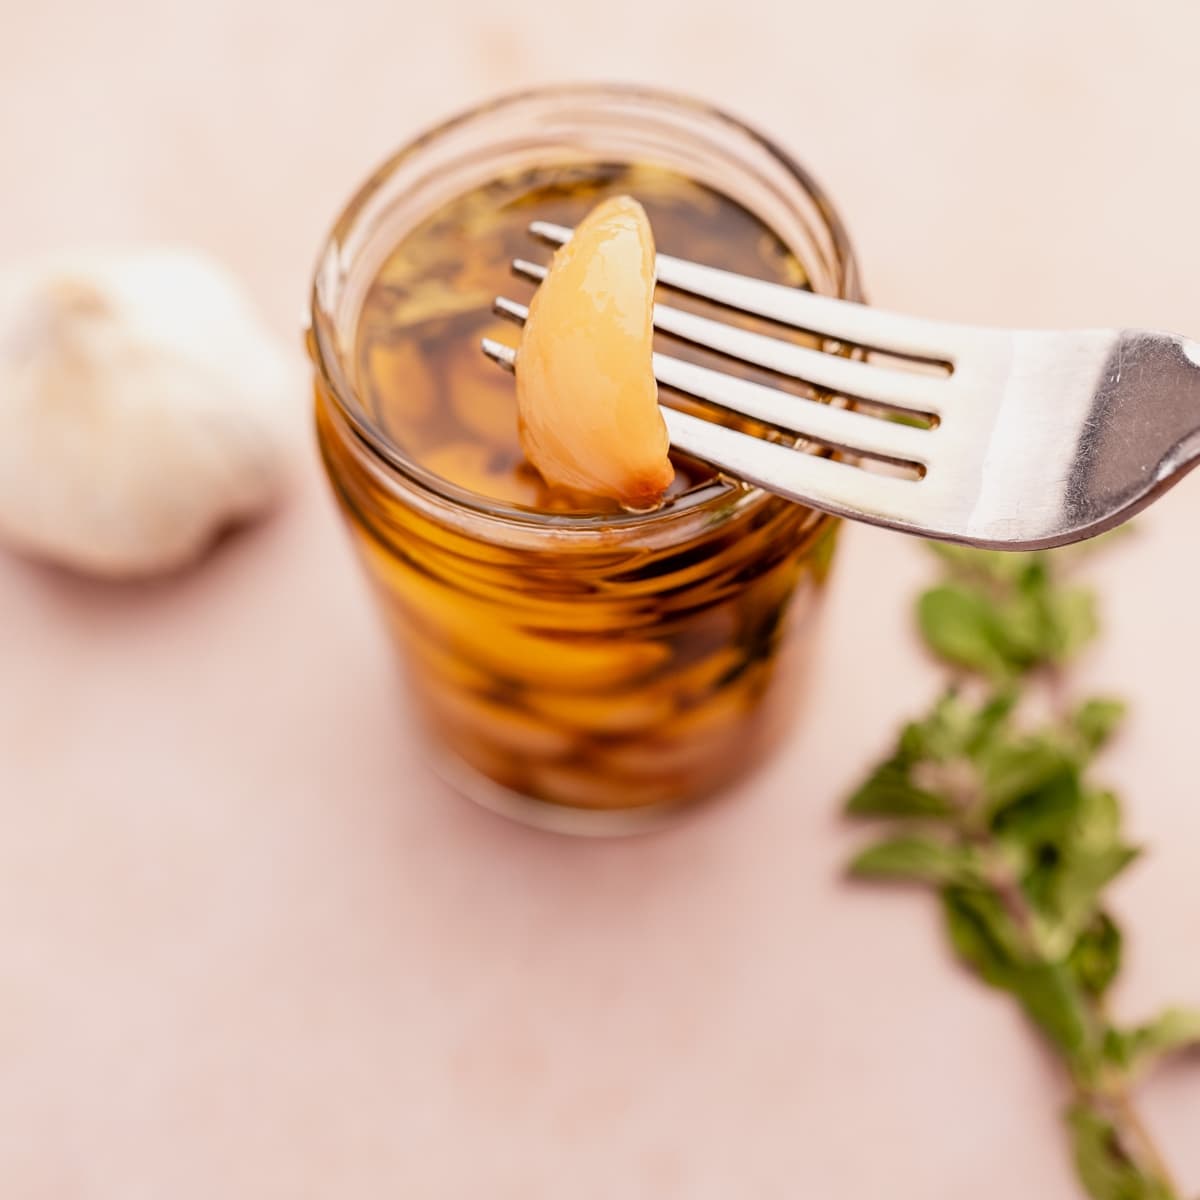 A jar of garlic confit submerged in fragrant olive oil.